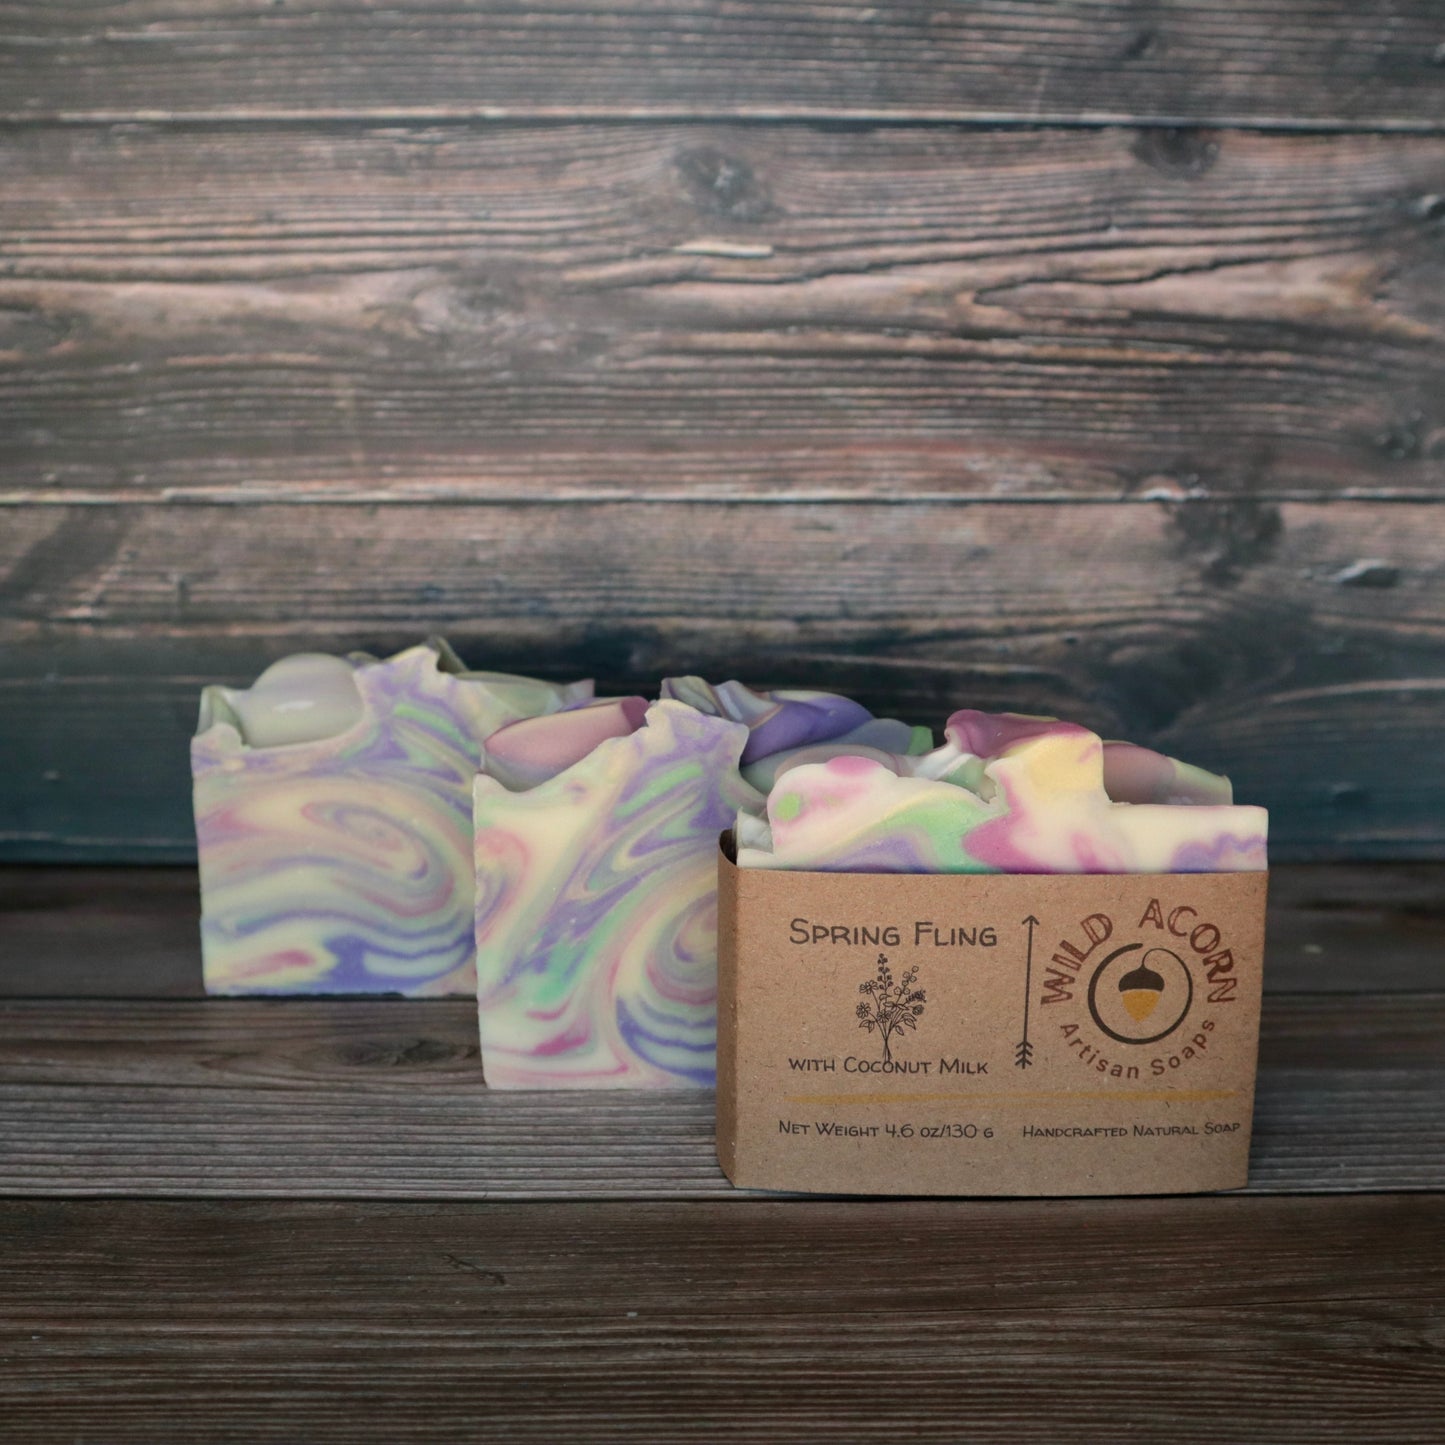 Spring Fling Soap with Coconut Milk